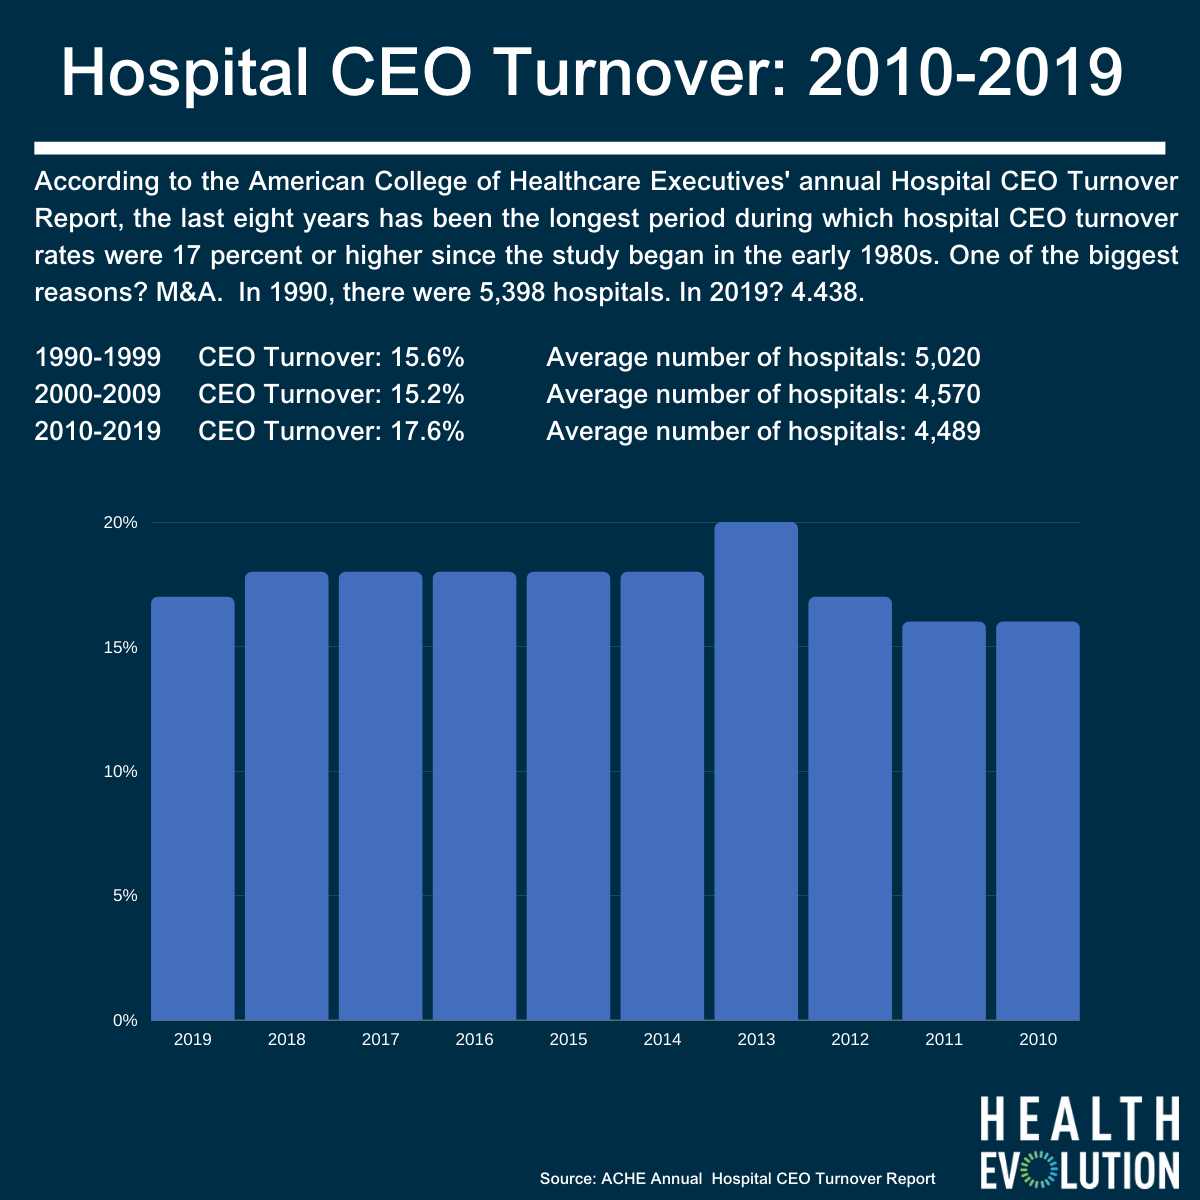 CEO turnover remains high in hospitals